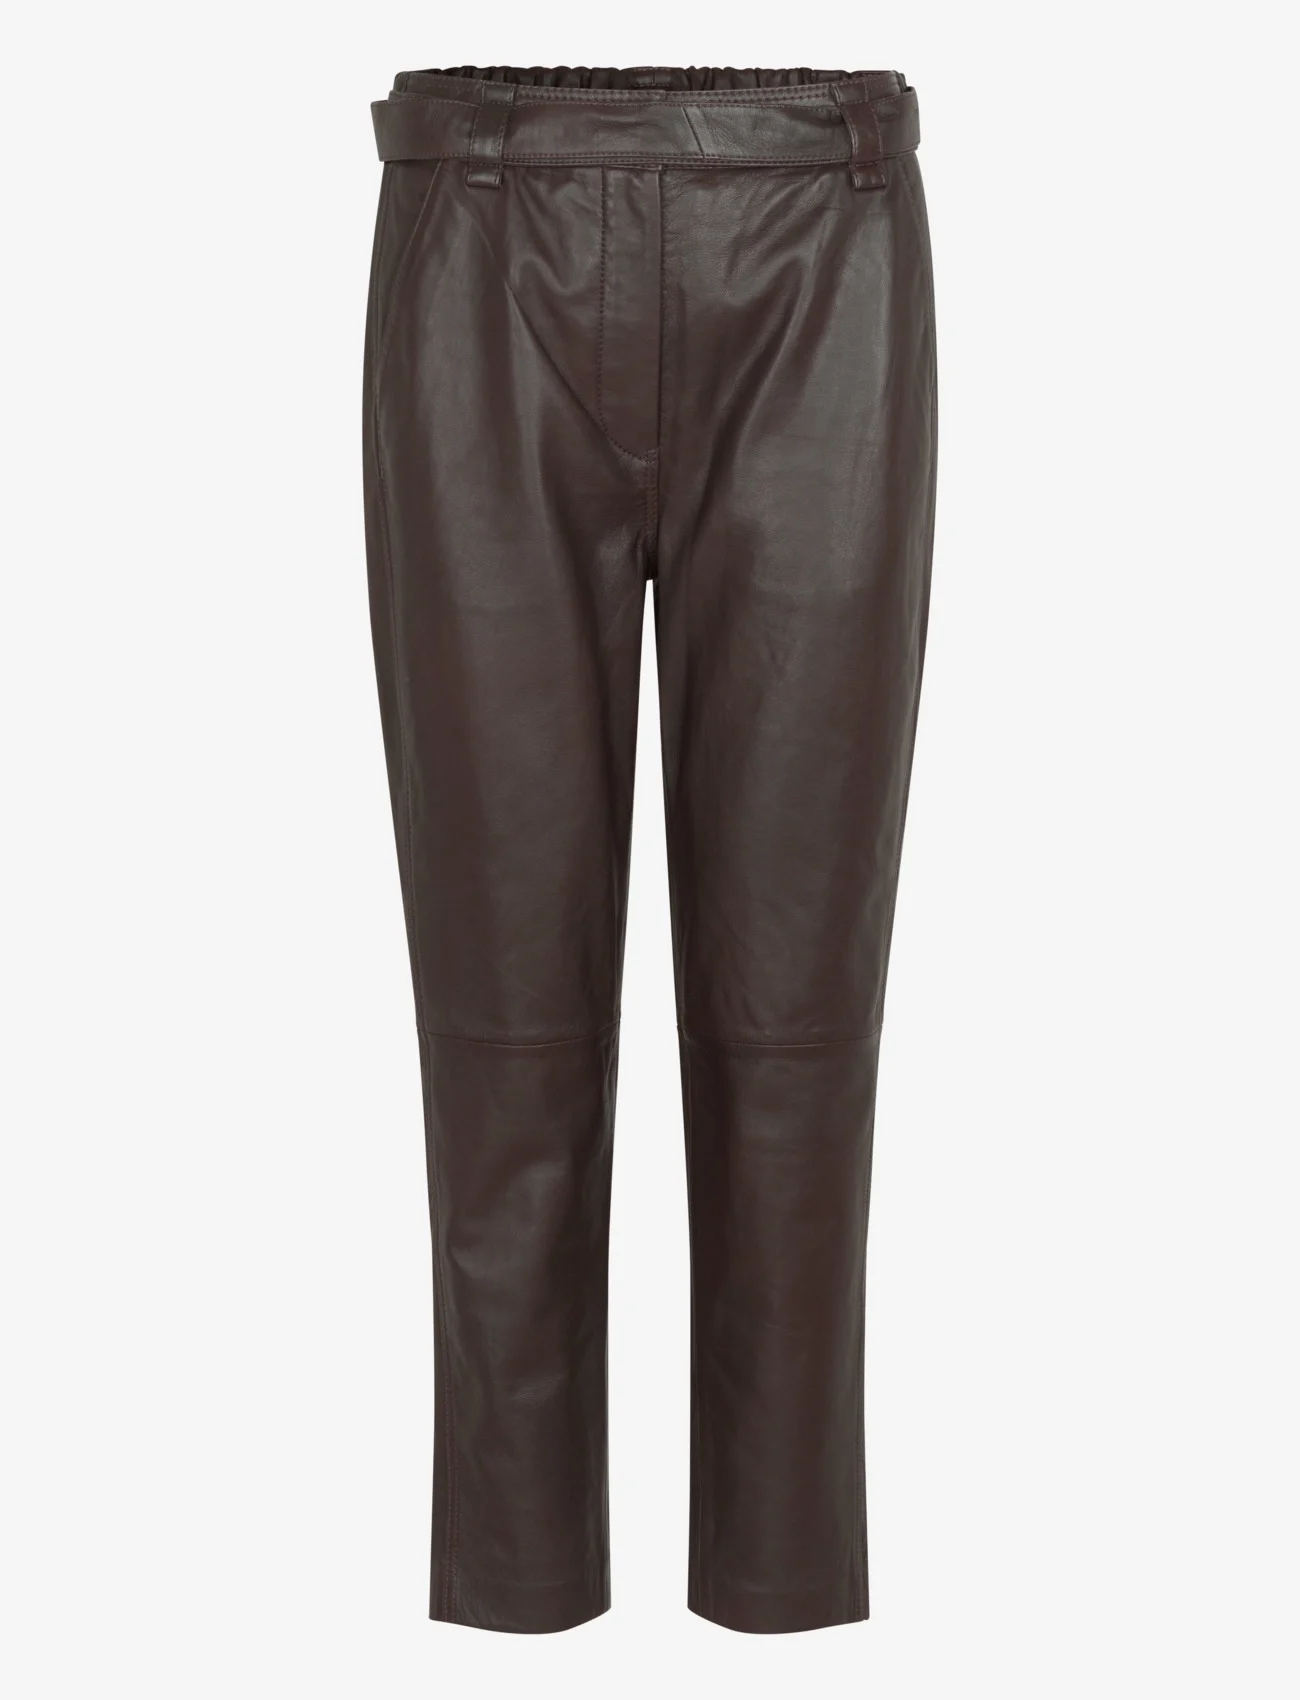 Second Female - Indie Leather New Trousers - festtøj til outletpriser - delicioso - 0